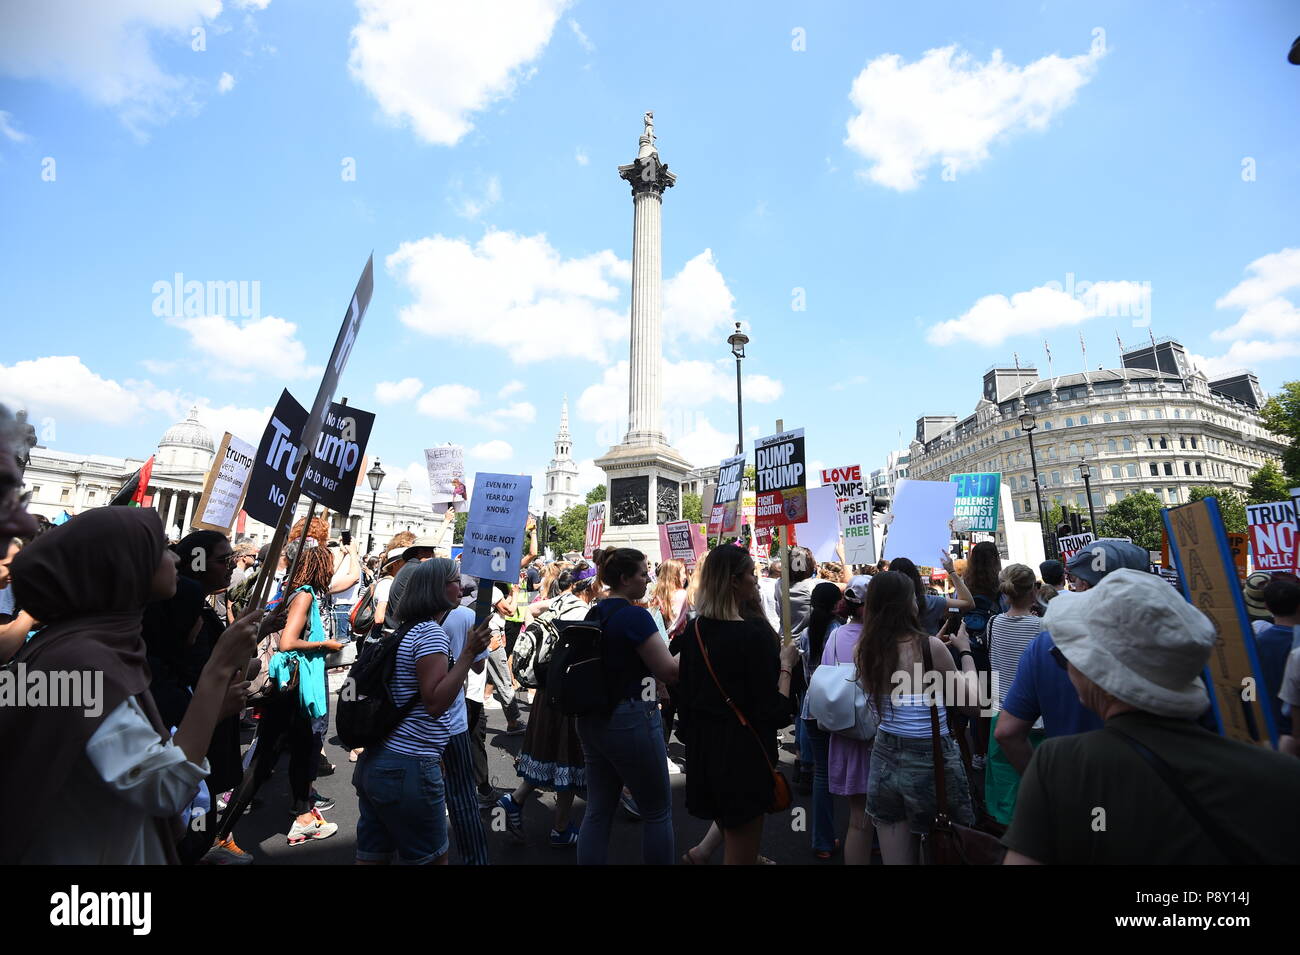 Demonstrators in Trafalgar Square, London, take part in protests against the visit of US President Donald Trump to the UK. Stock Photo